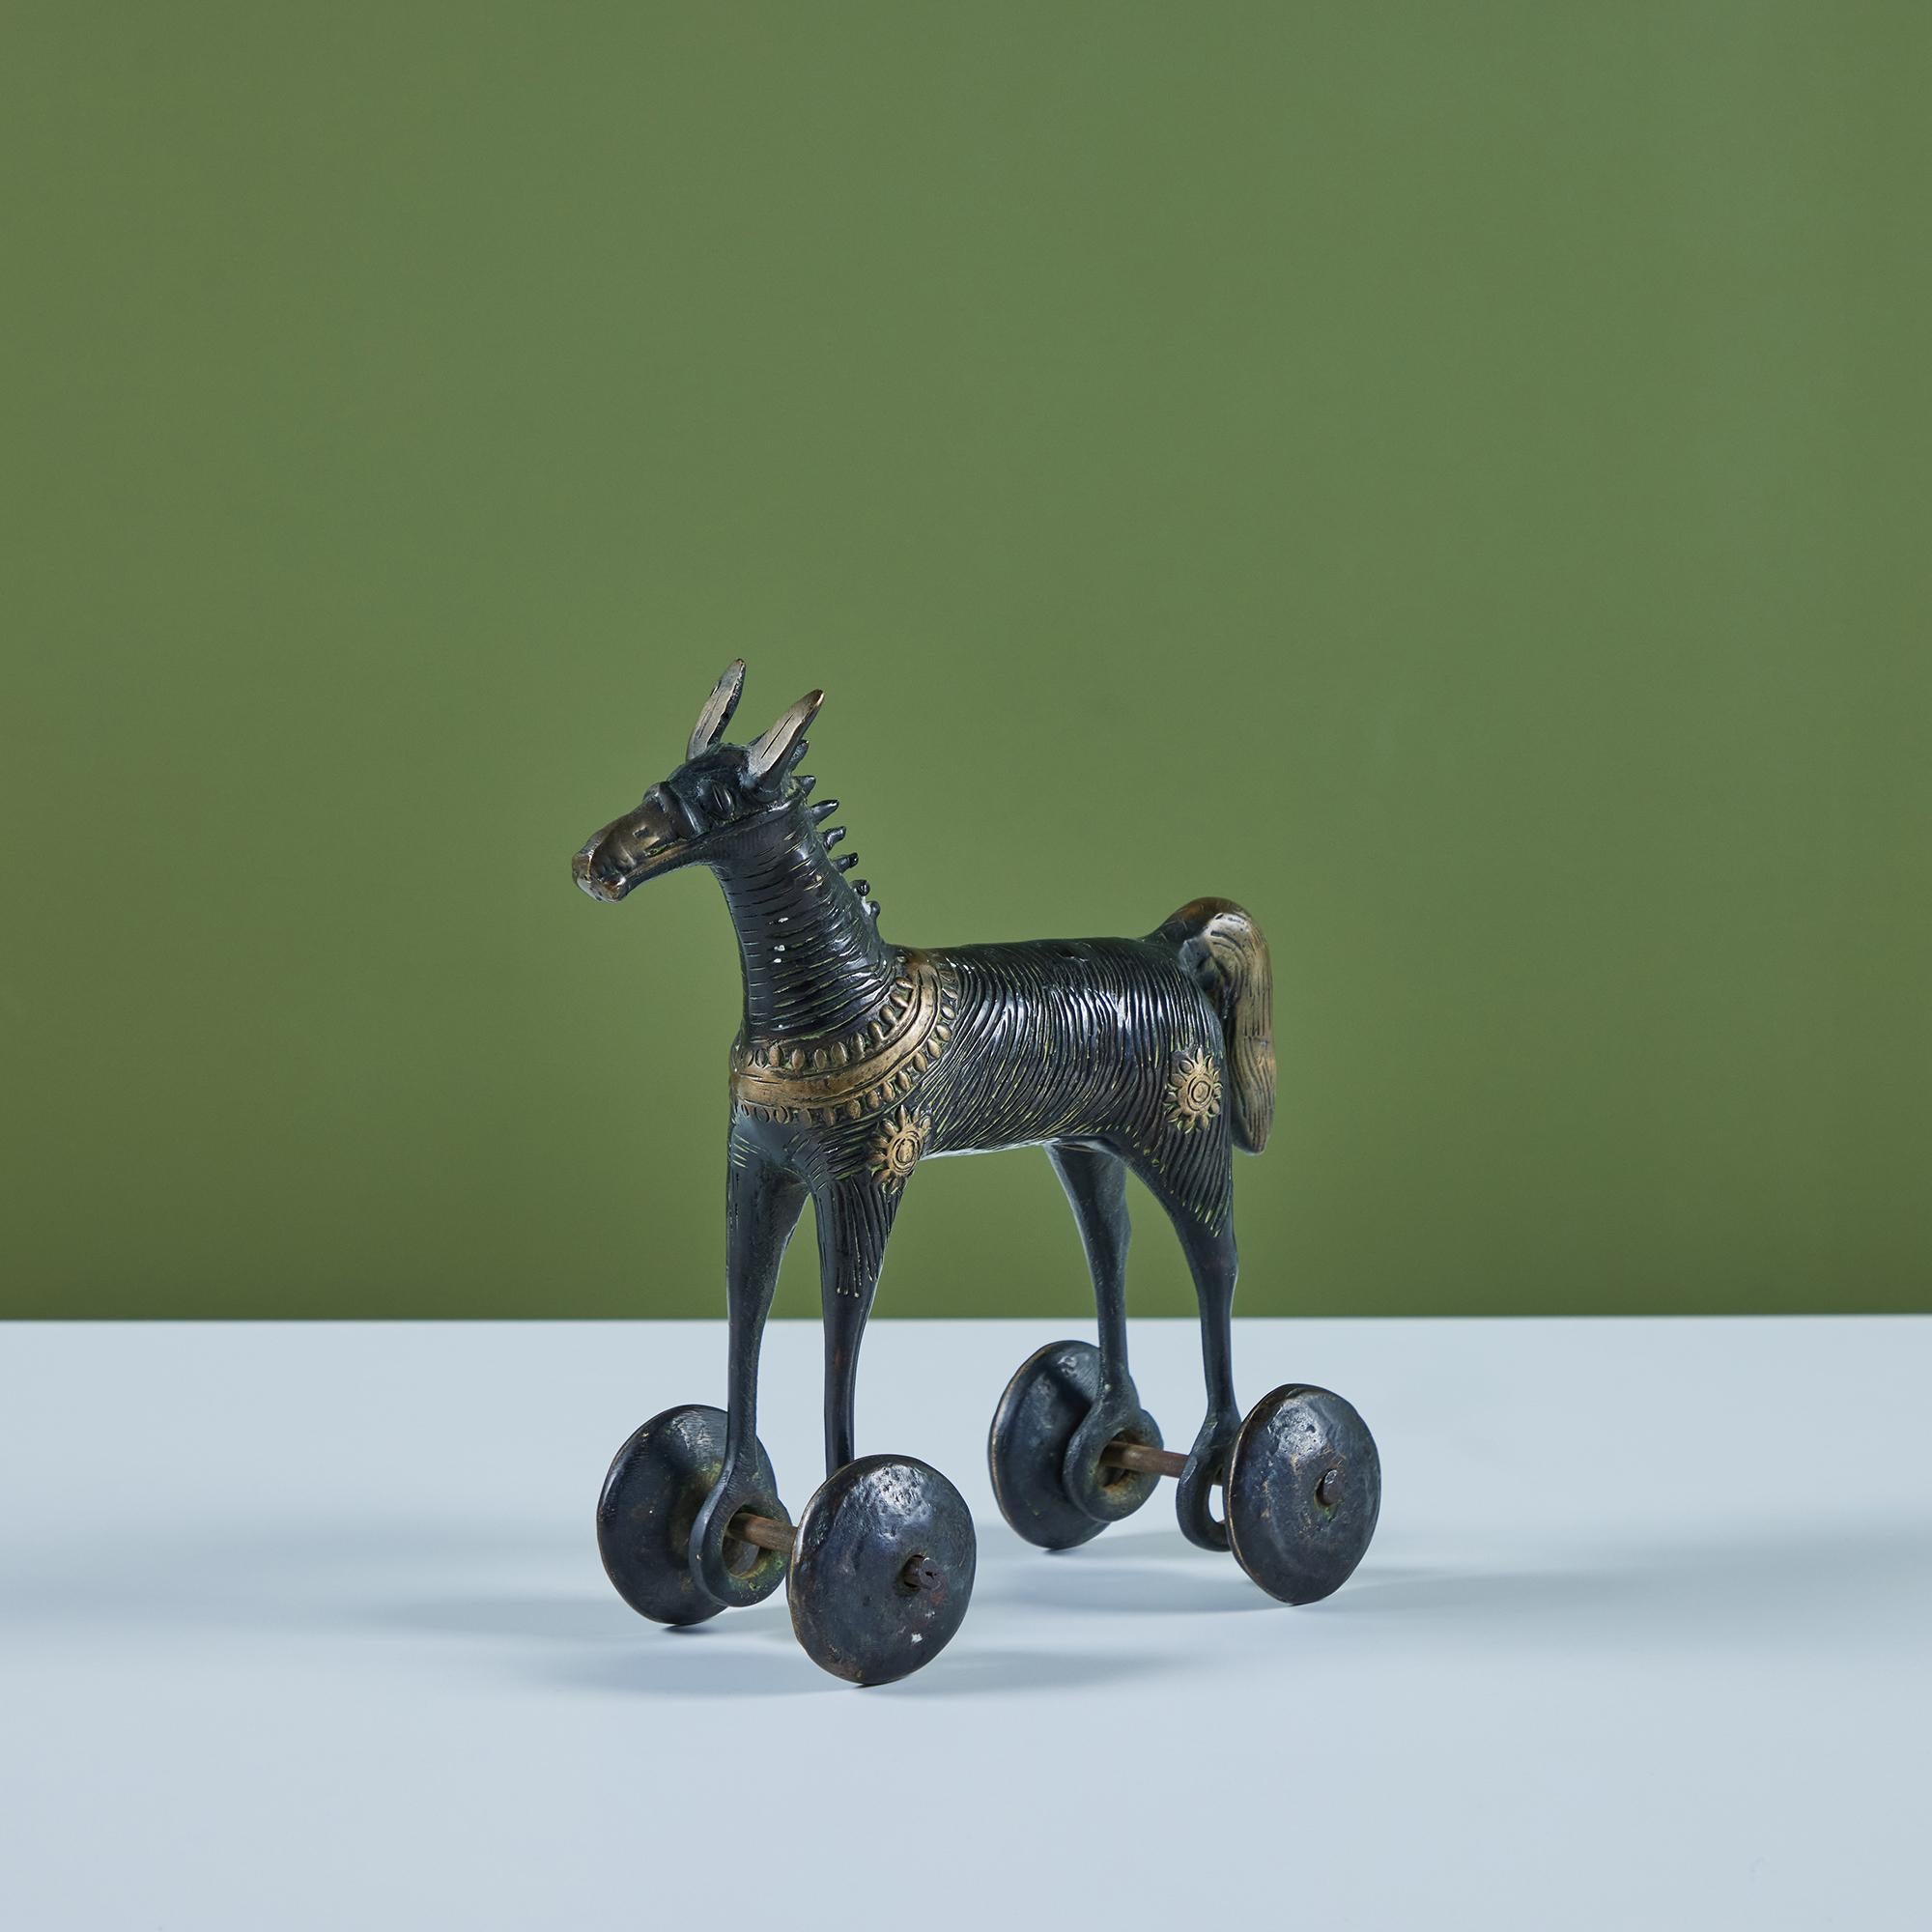 Cast bronze toy horse on four wheels. Reminiscent of early 19th century Indian toys, these pieces were often left as offering in temples for children to find. The gift of the horse to the Gods was believed to leave one in high standings. This one is